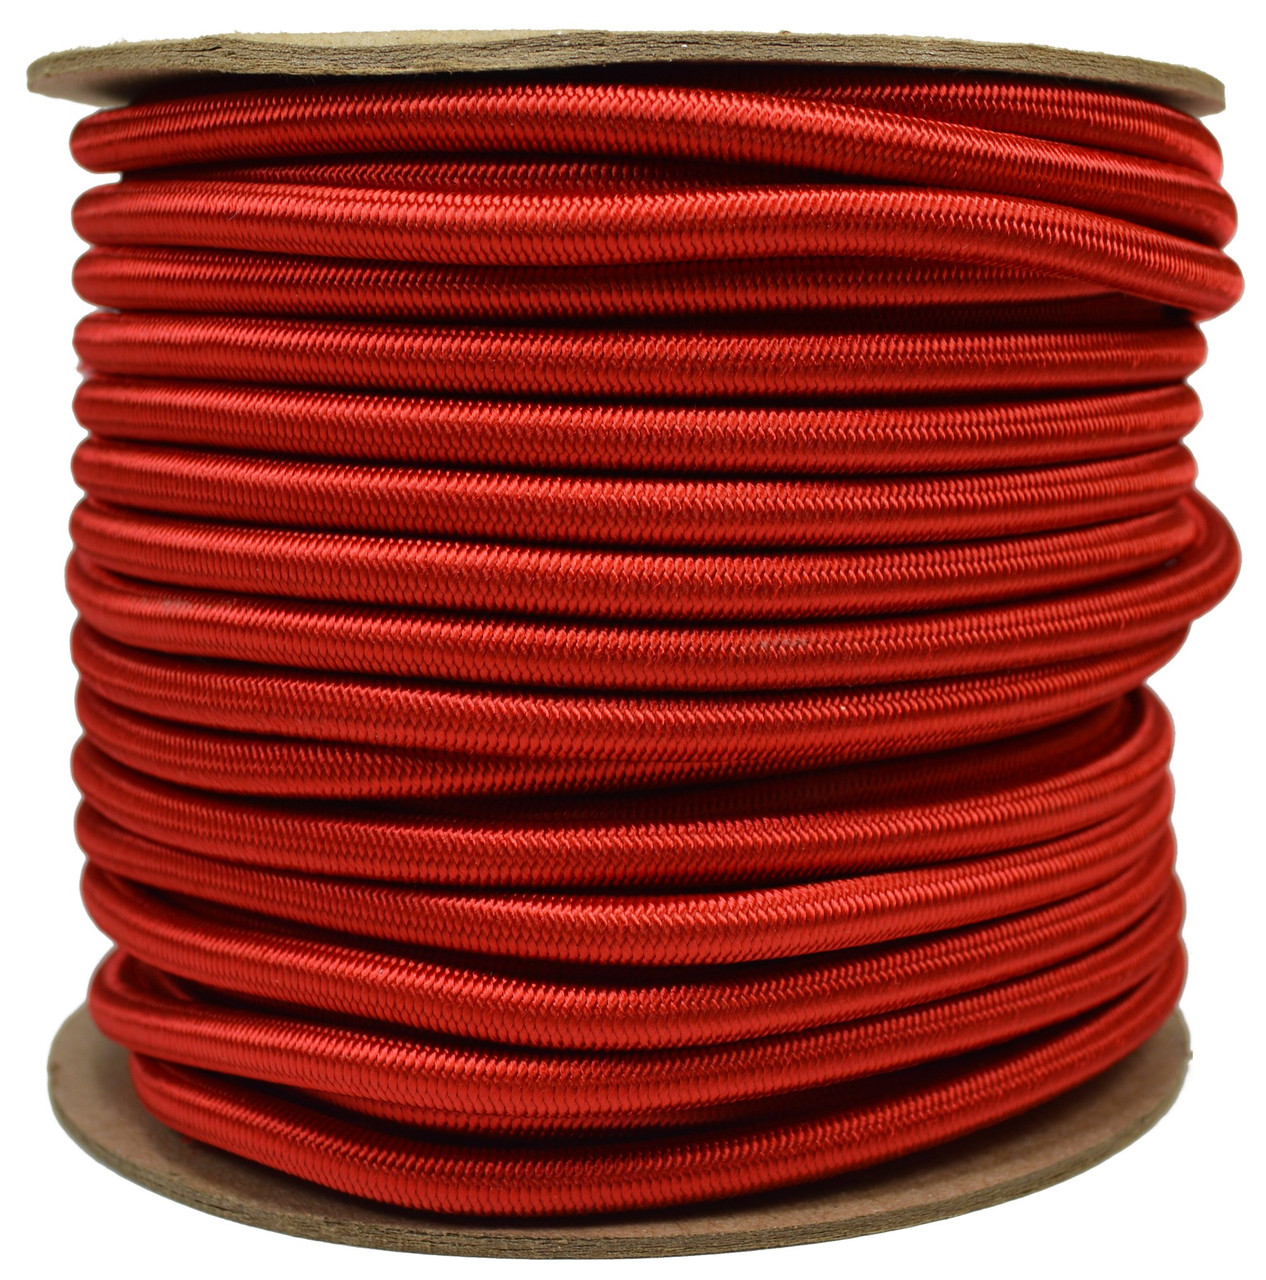 Shockcord/bungy diameters and lengths Kayak Deck Line various colours